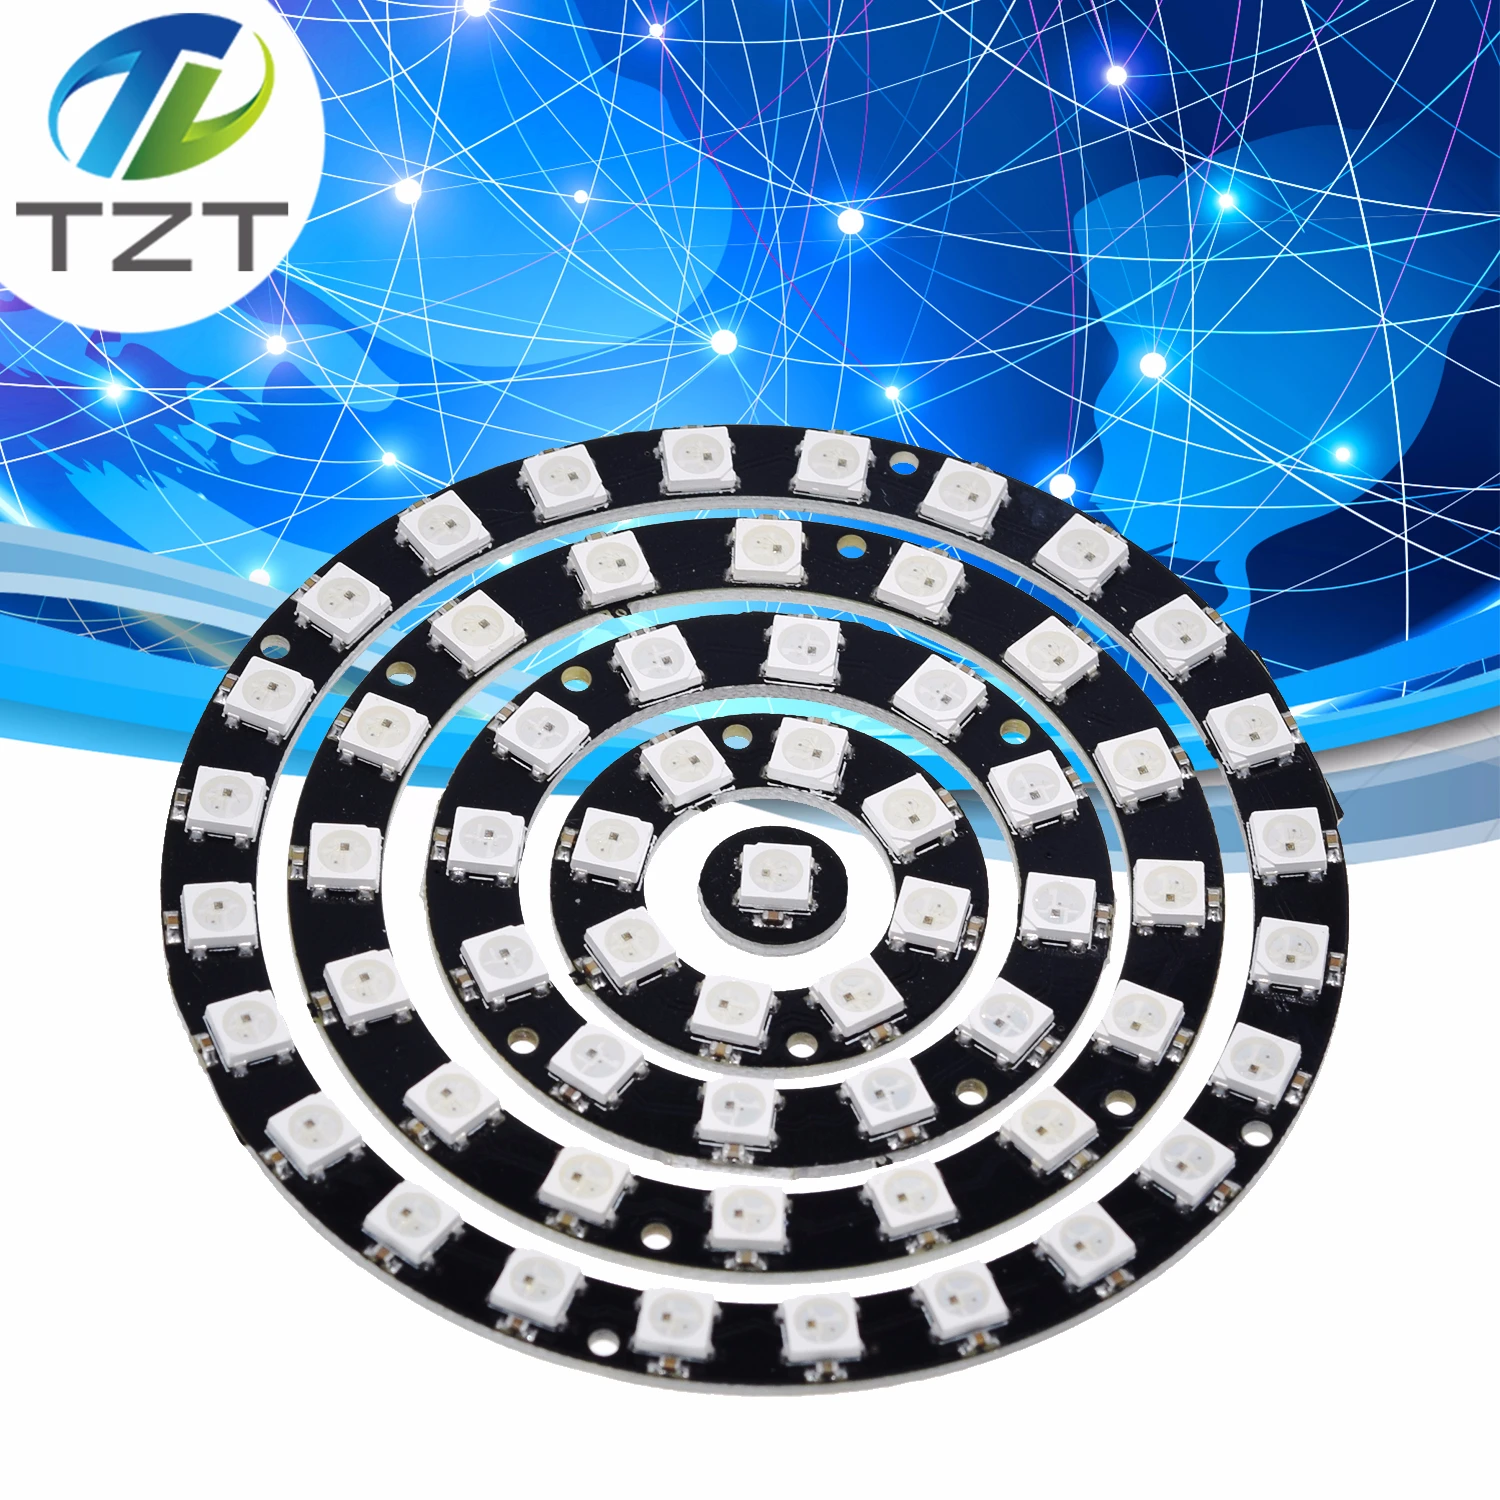 

1pcs RGB LED Ring 1Bit 8Bit 12Bit 16Bit 24Bit WS2812 5050 RGB LED + Integrated Drivers Built-in full-color actuate lights Round